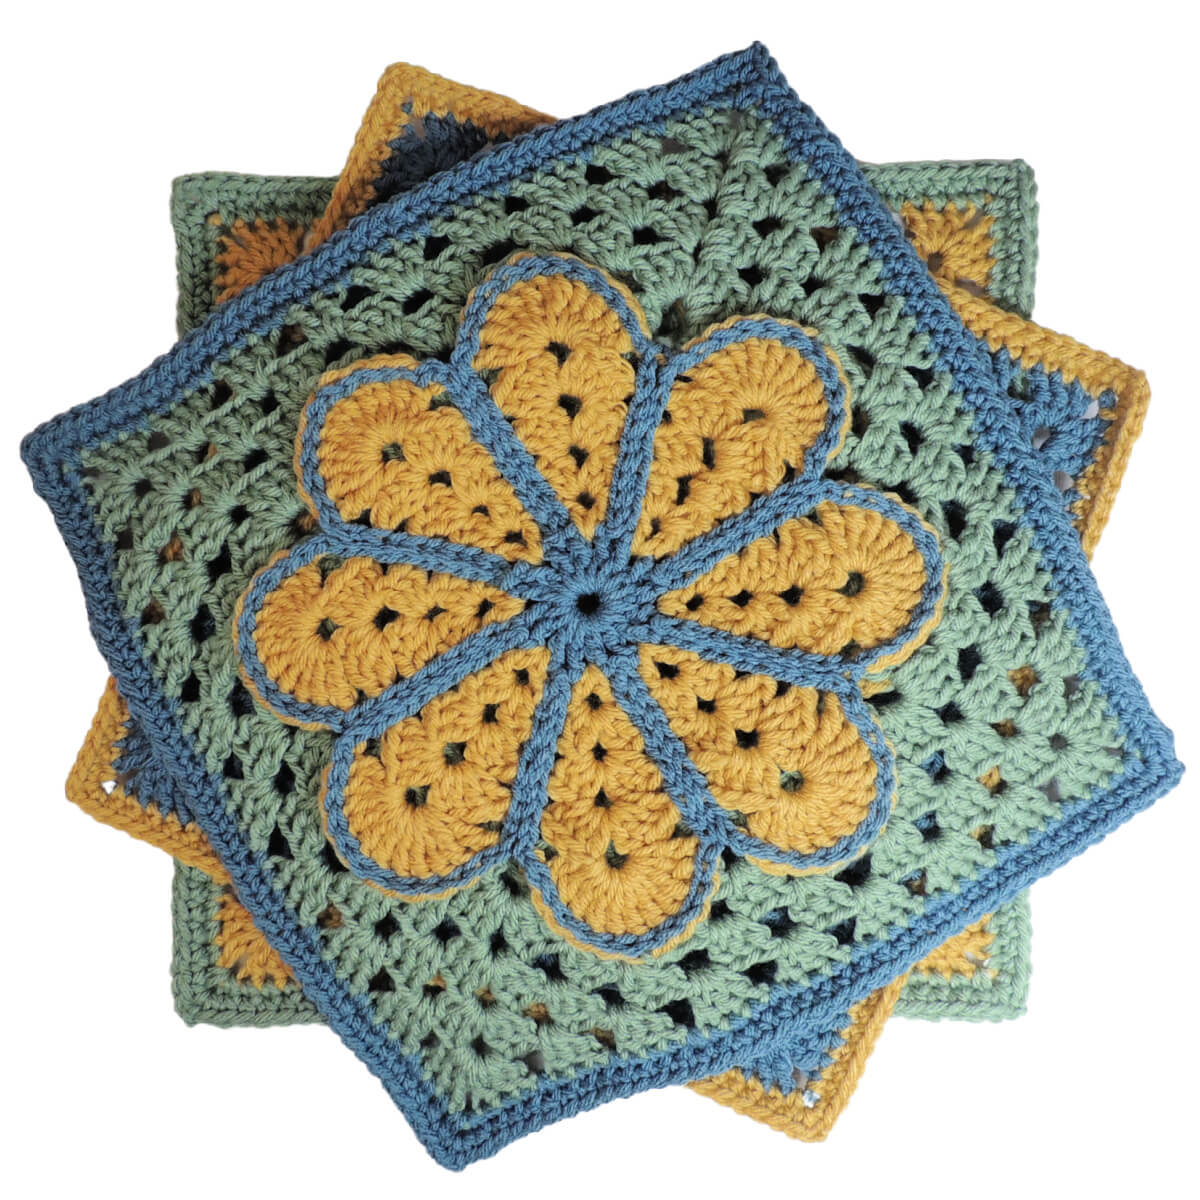 How To Make a Flower Granny Square: Free Crochet Pattern